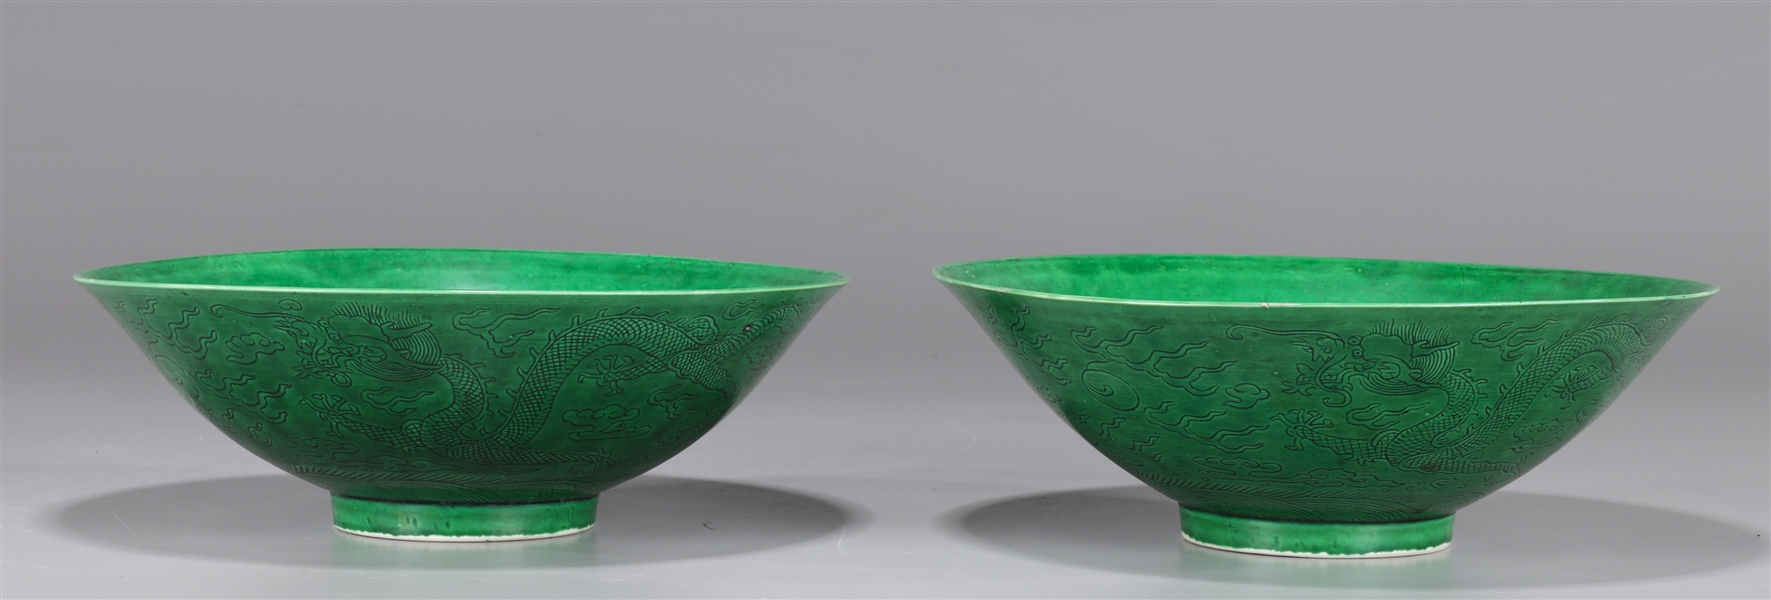 Pair of Chinese green glazed porcelain